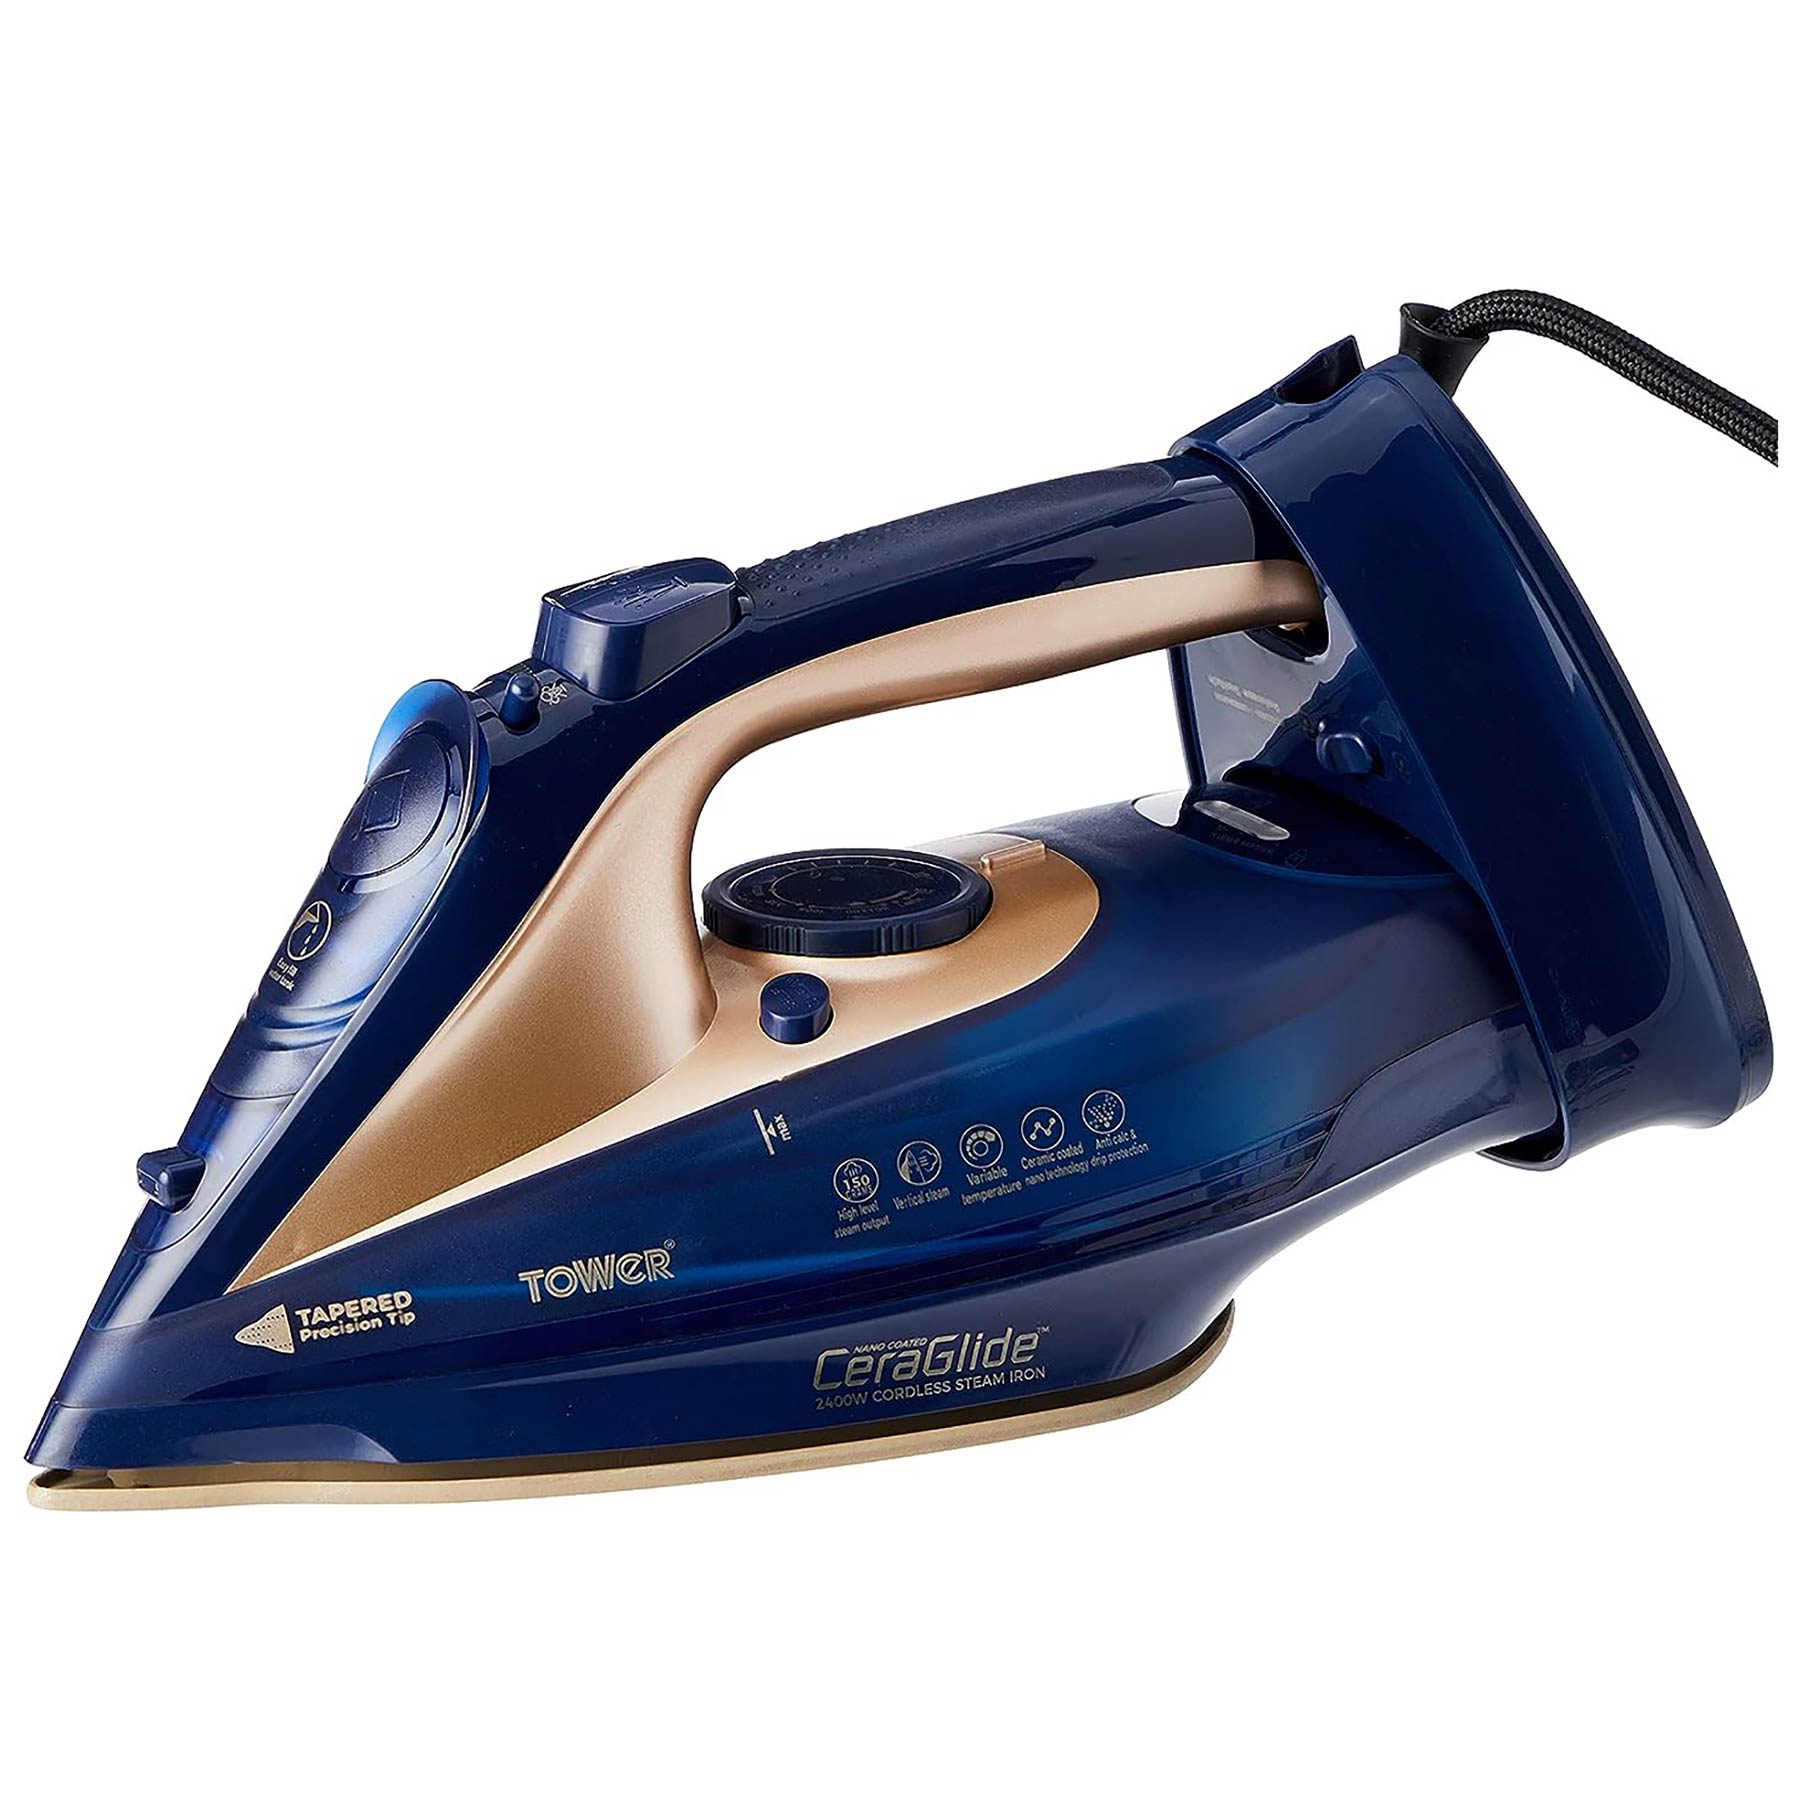 Image of Tower T22008BLG 2 in 1 Cord Cordless Steam Iron in Blue and Gold